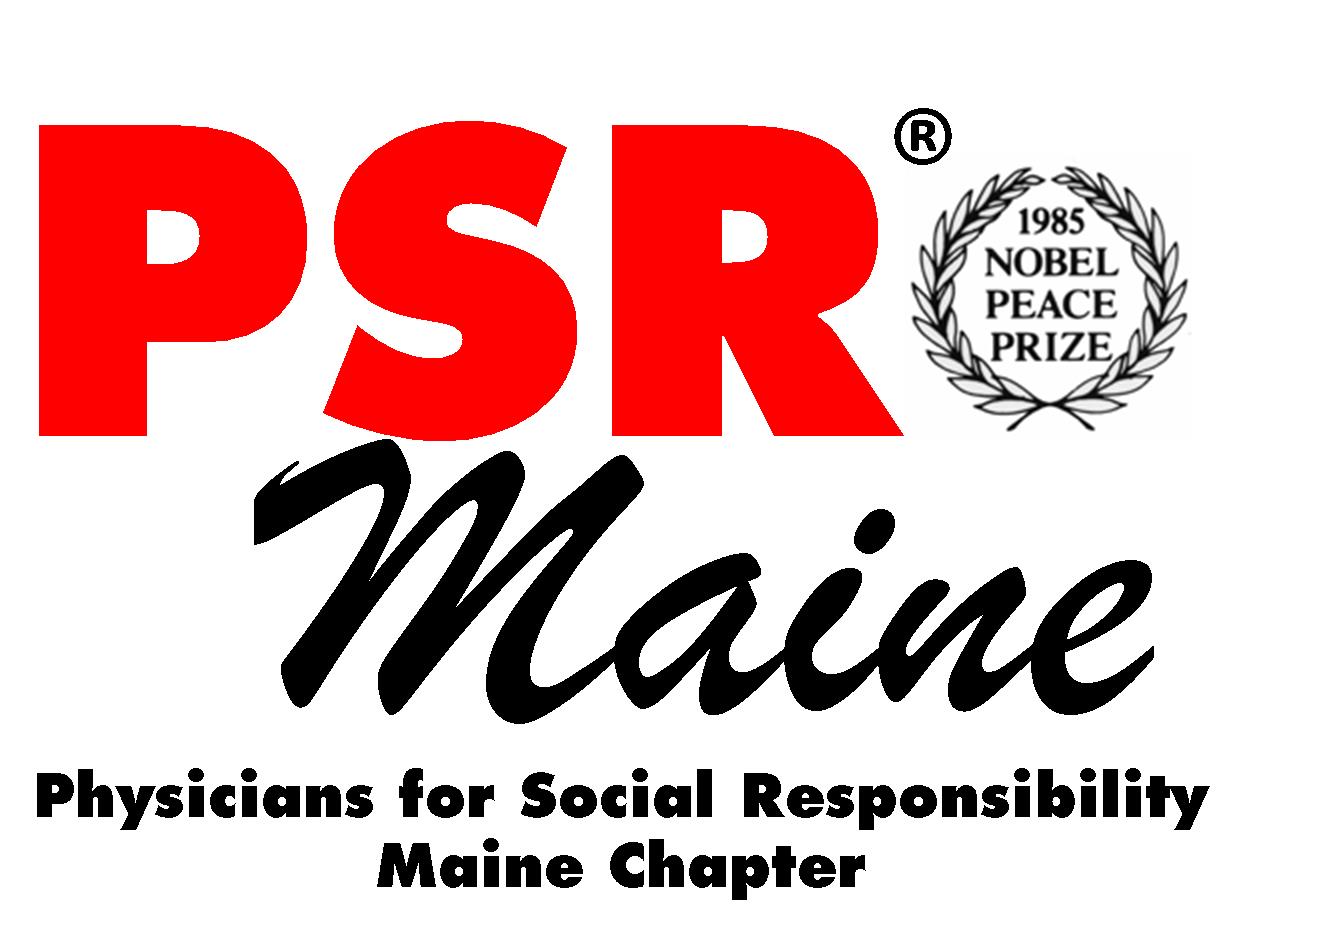 Physicians for Social Responsibility - Maine